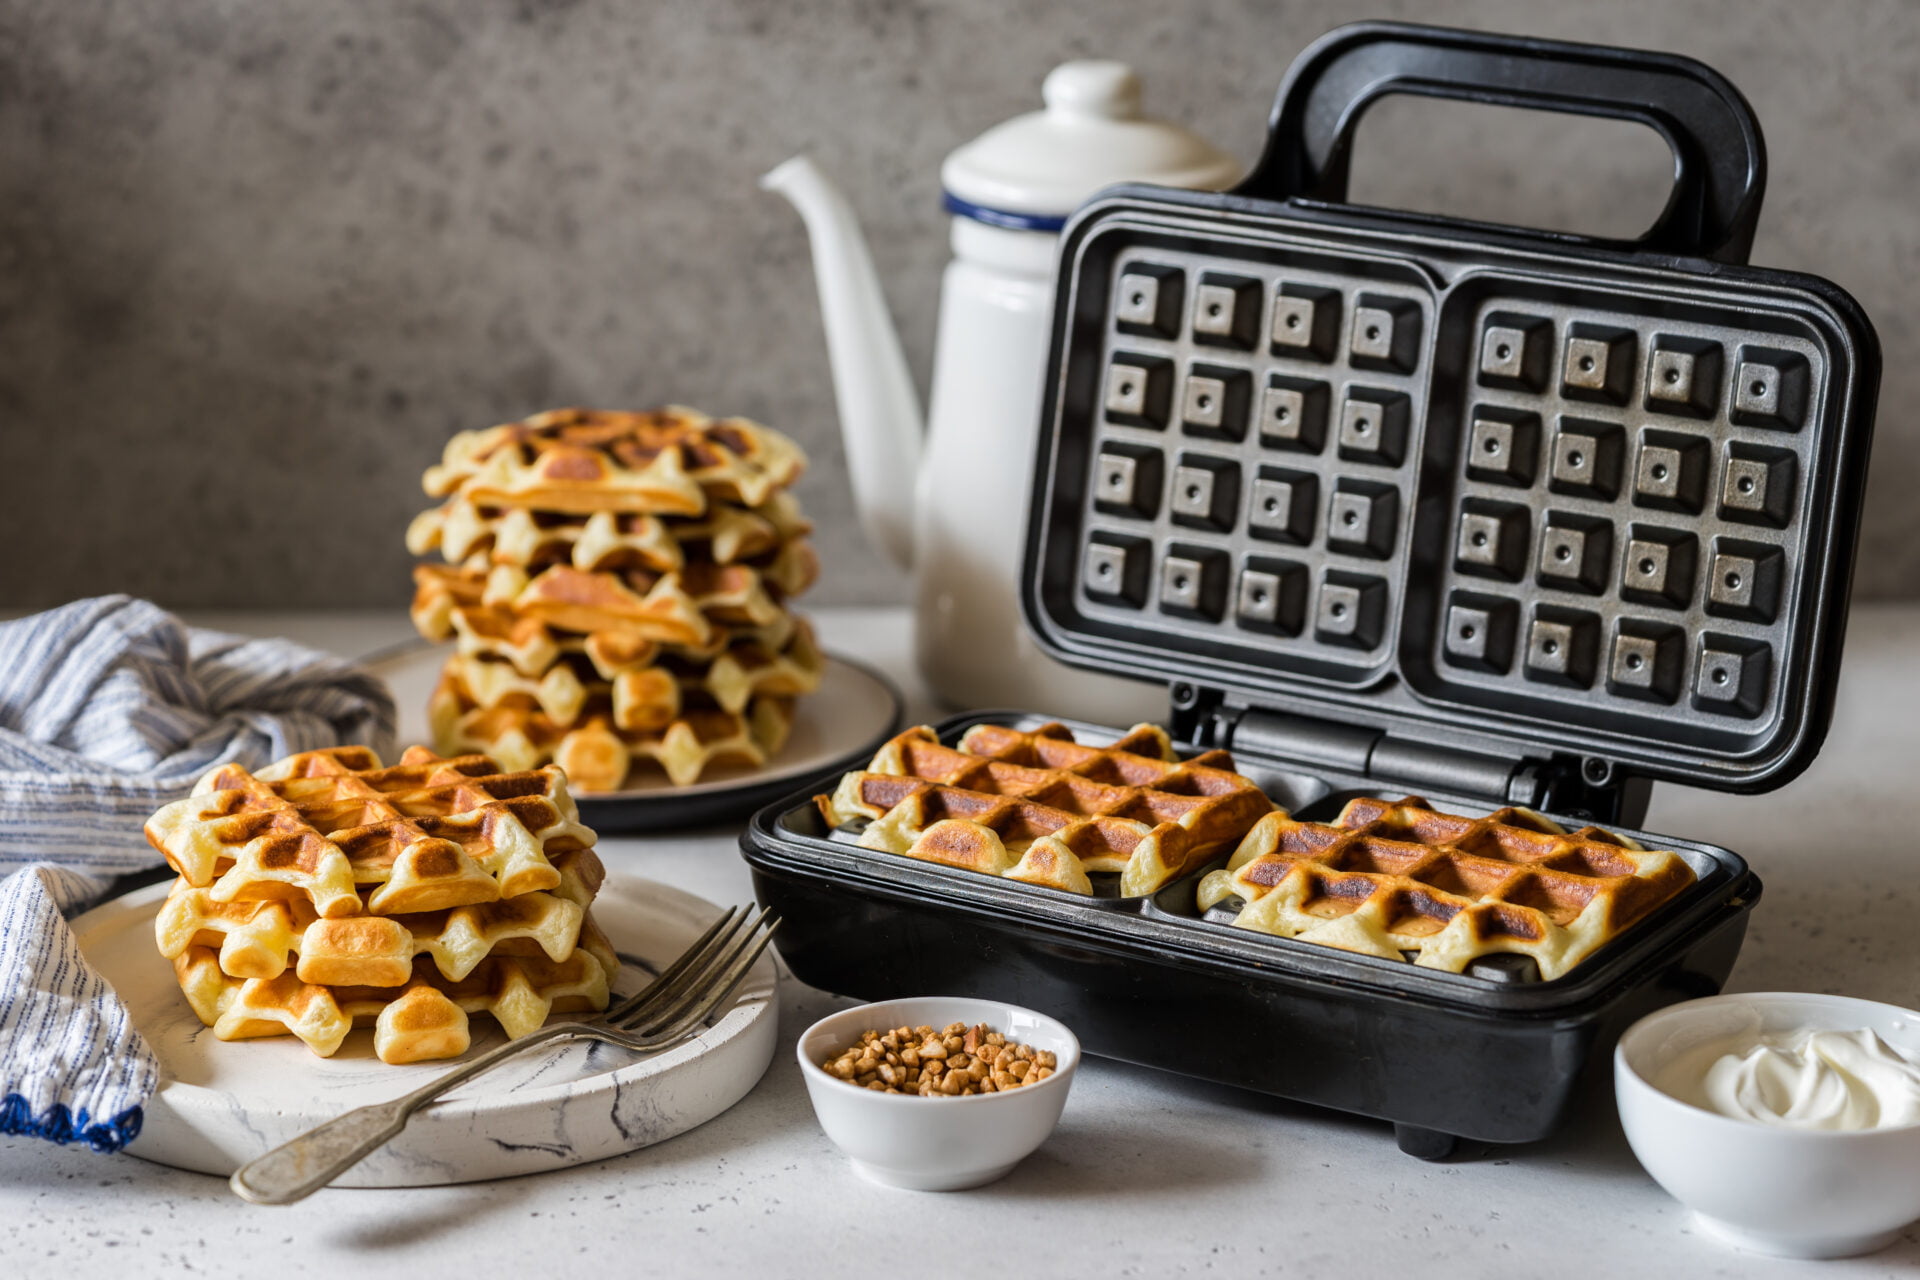 Waffles Being Baked in a non-toxic Waffle Maker